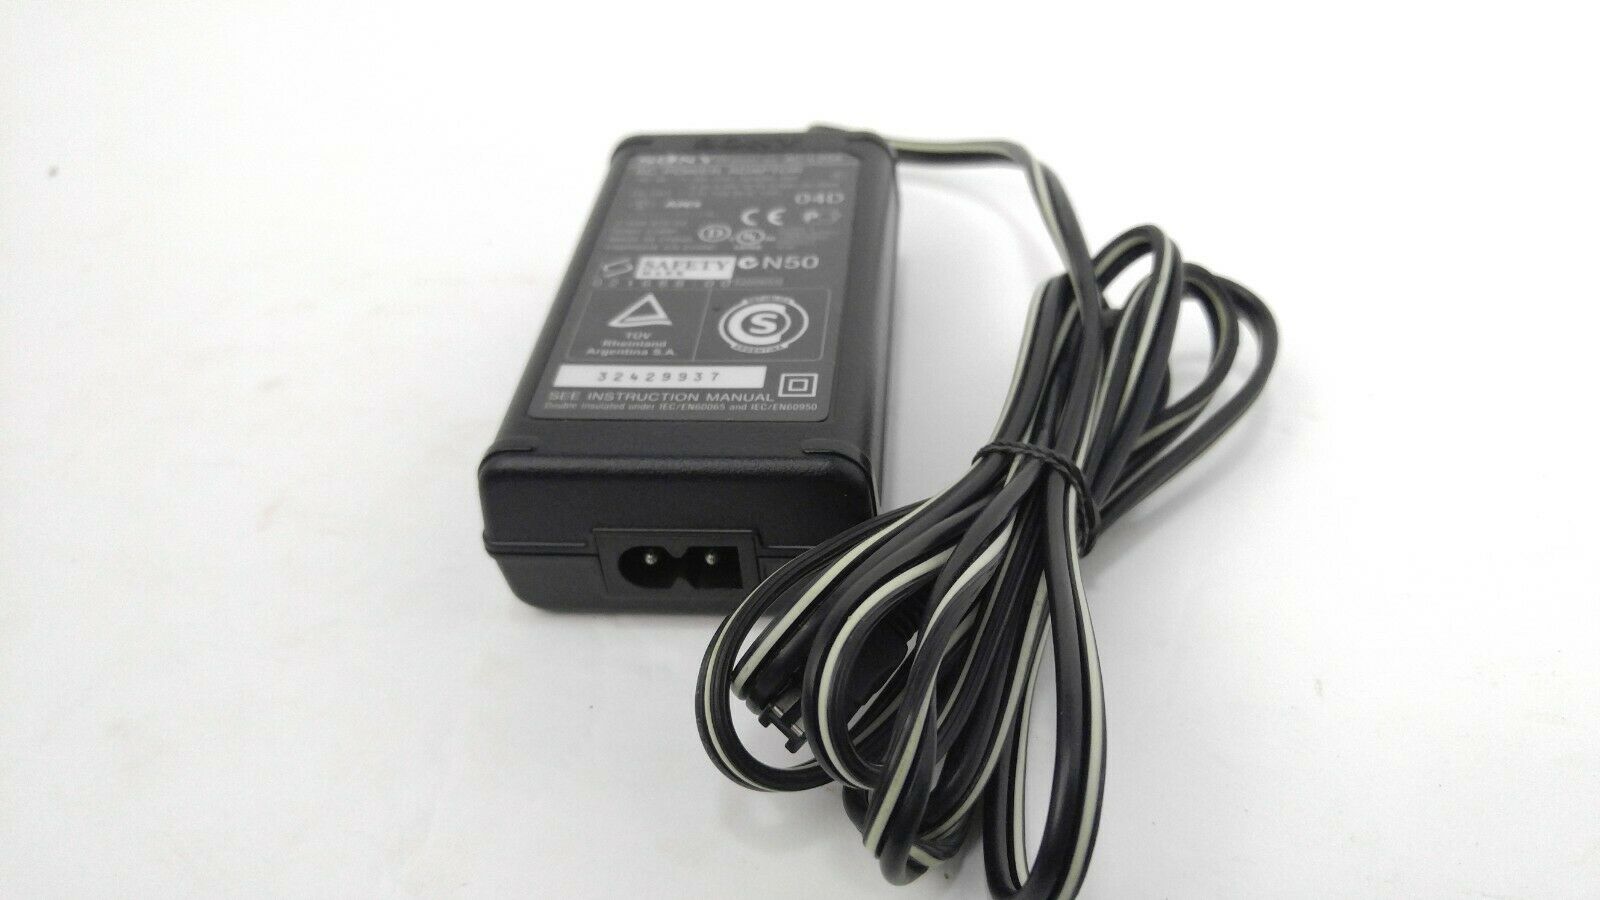 AC-L25A Sony AC Adapter for Handycam HDR-CX560 - Click Image to Close